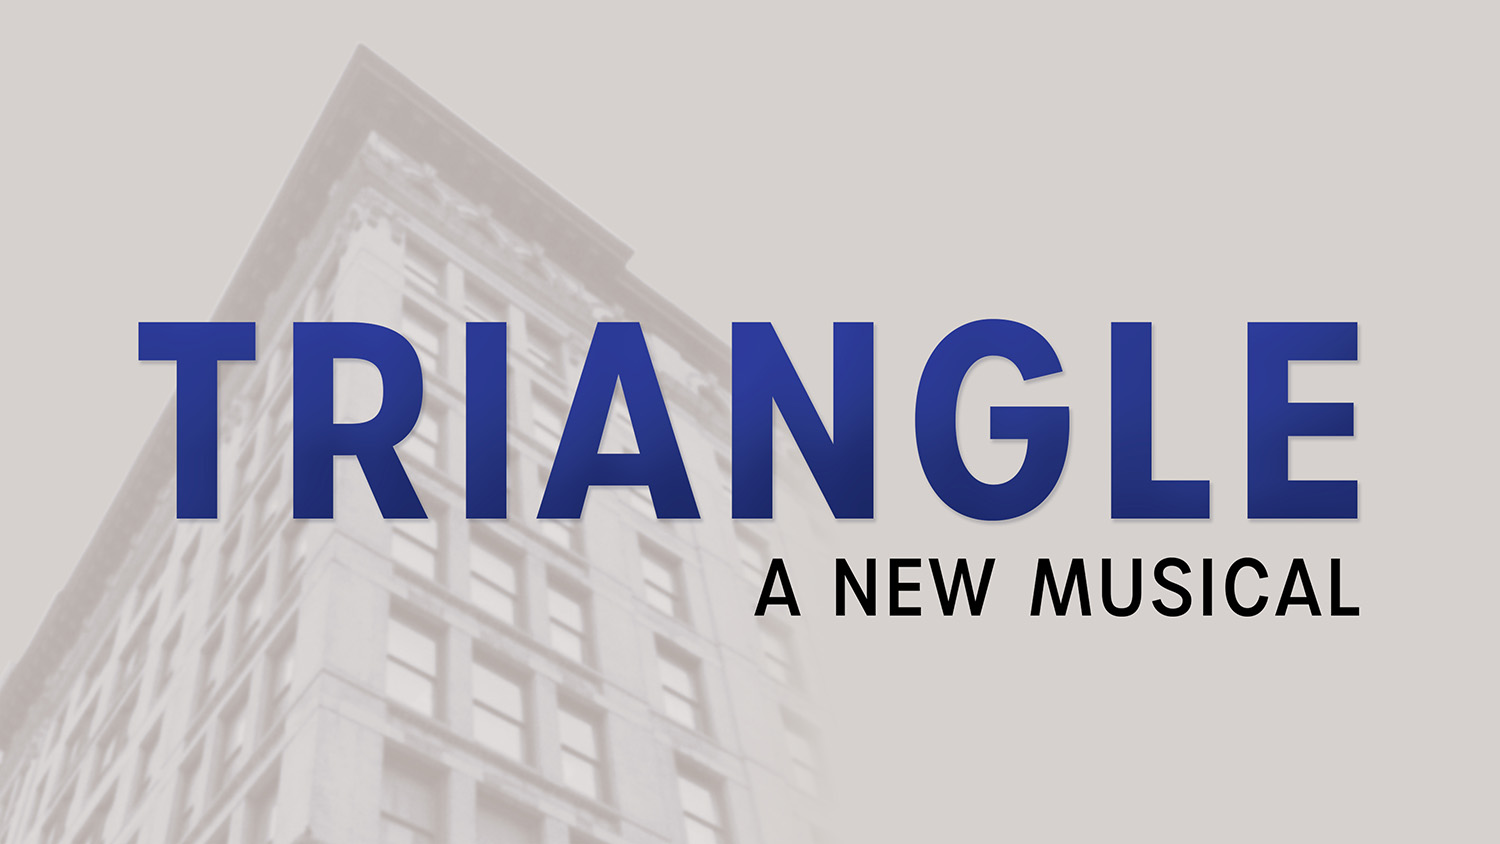 The words Triangle a new musical hang in front of a gray photo of the Triangle building in New York.